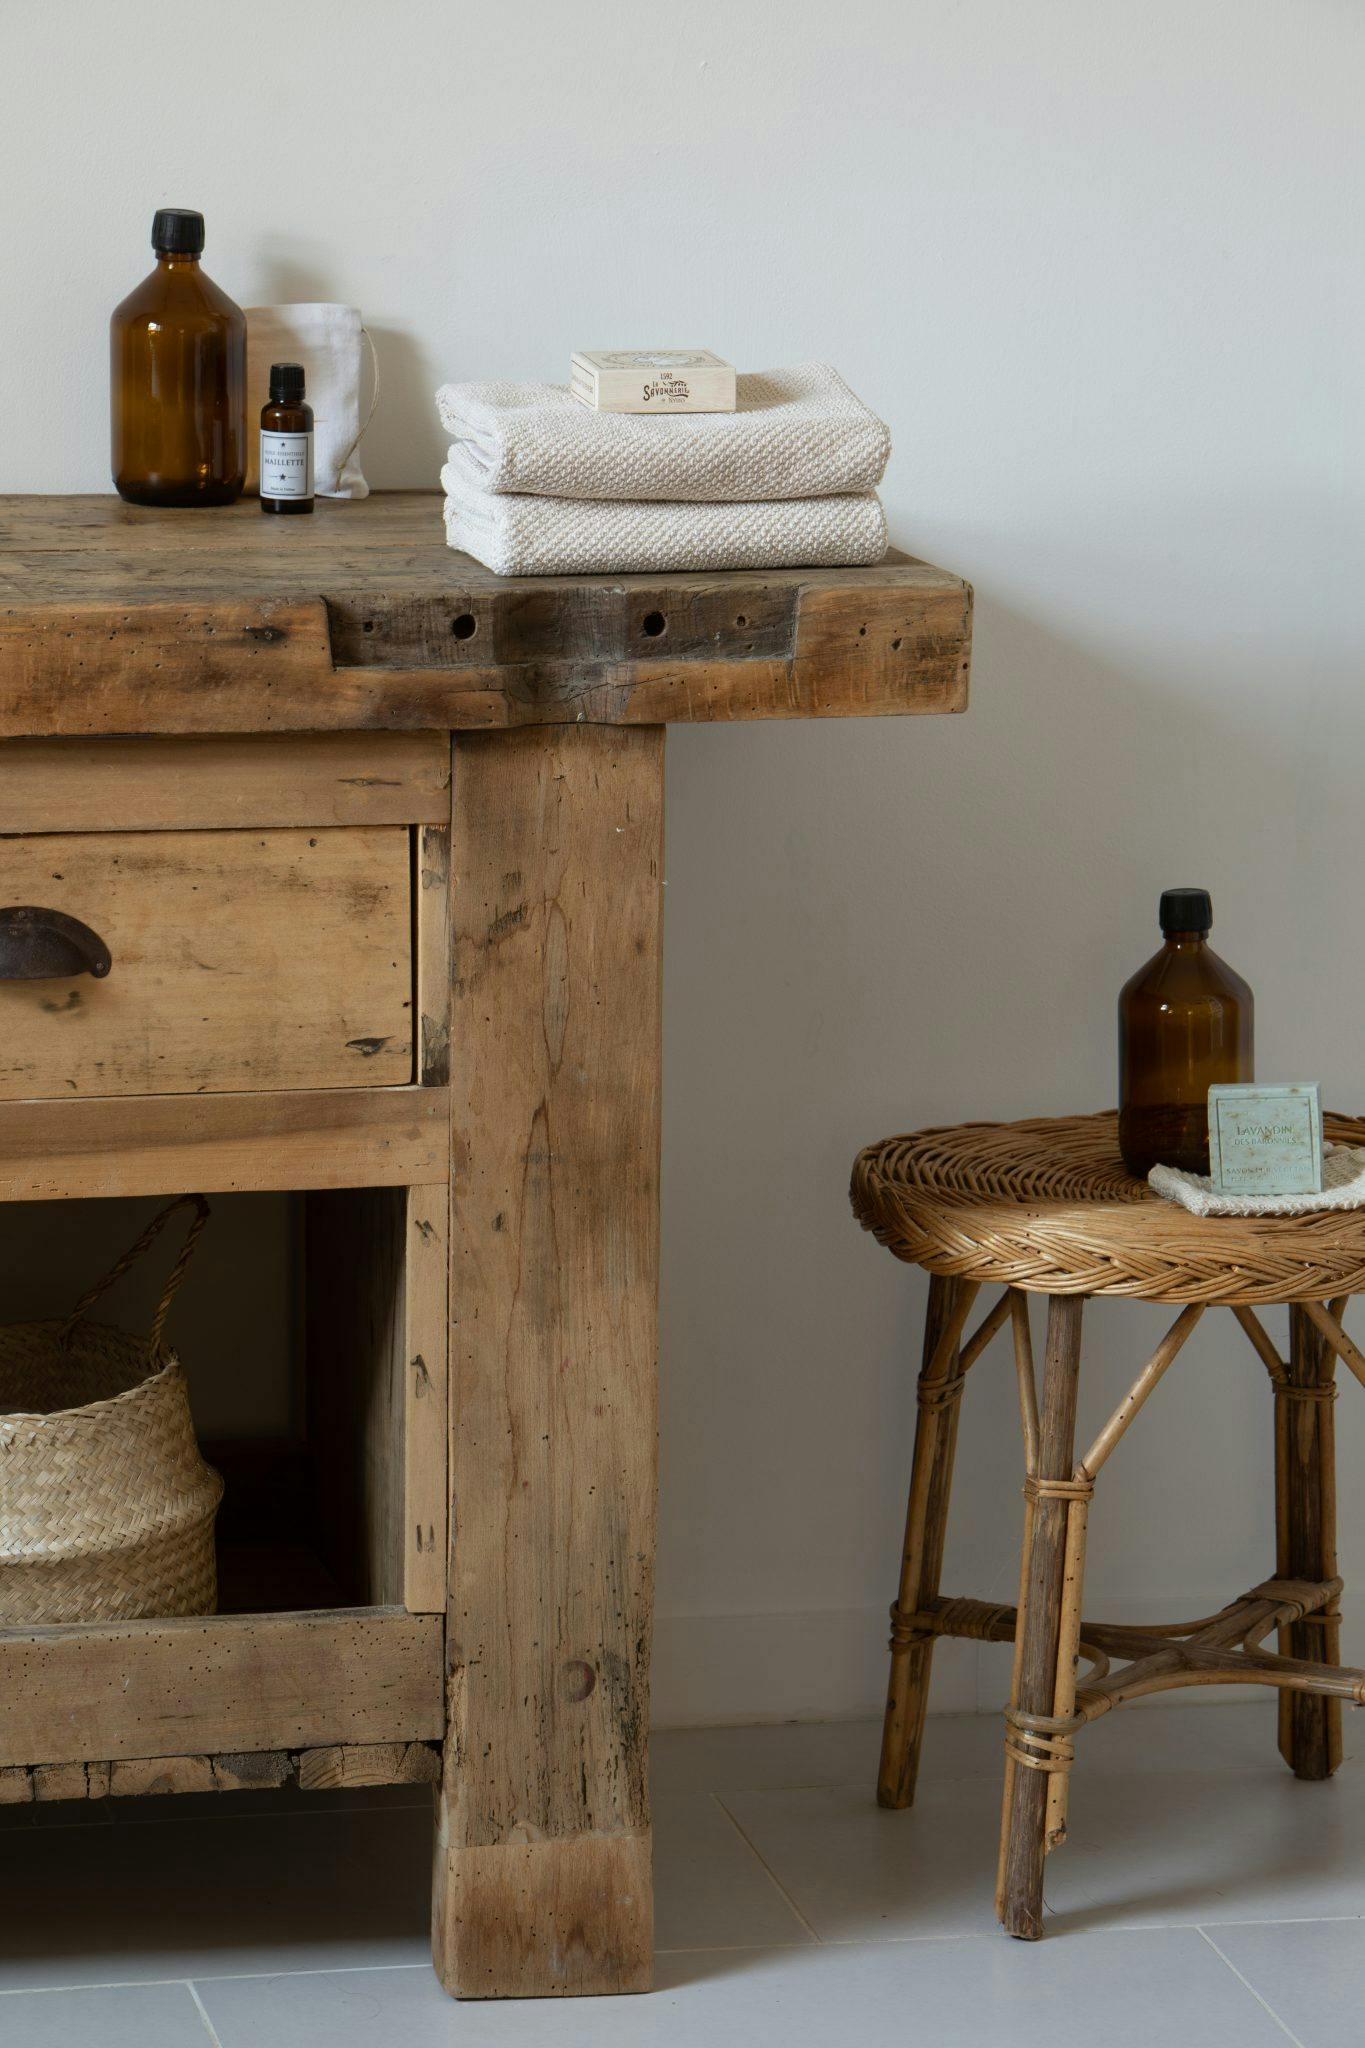 decoration: wooden sideboard and handmade stool